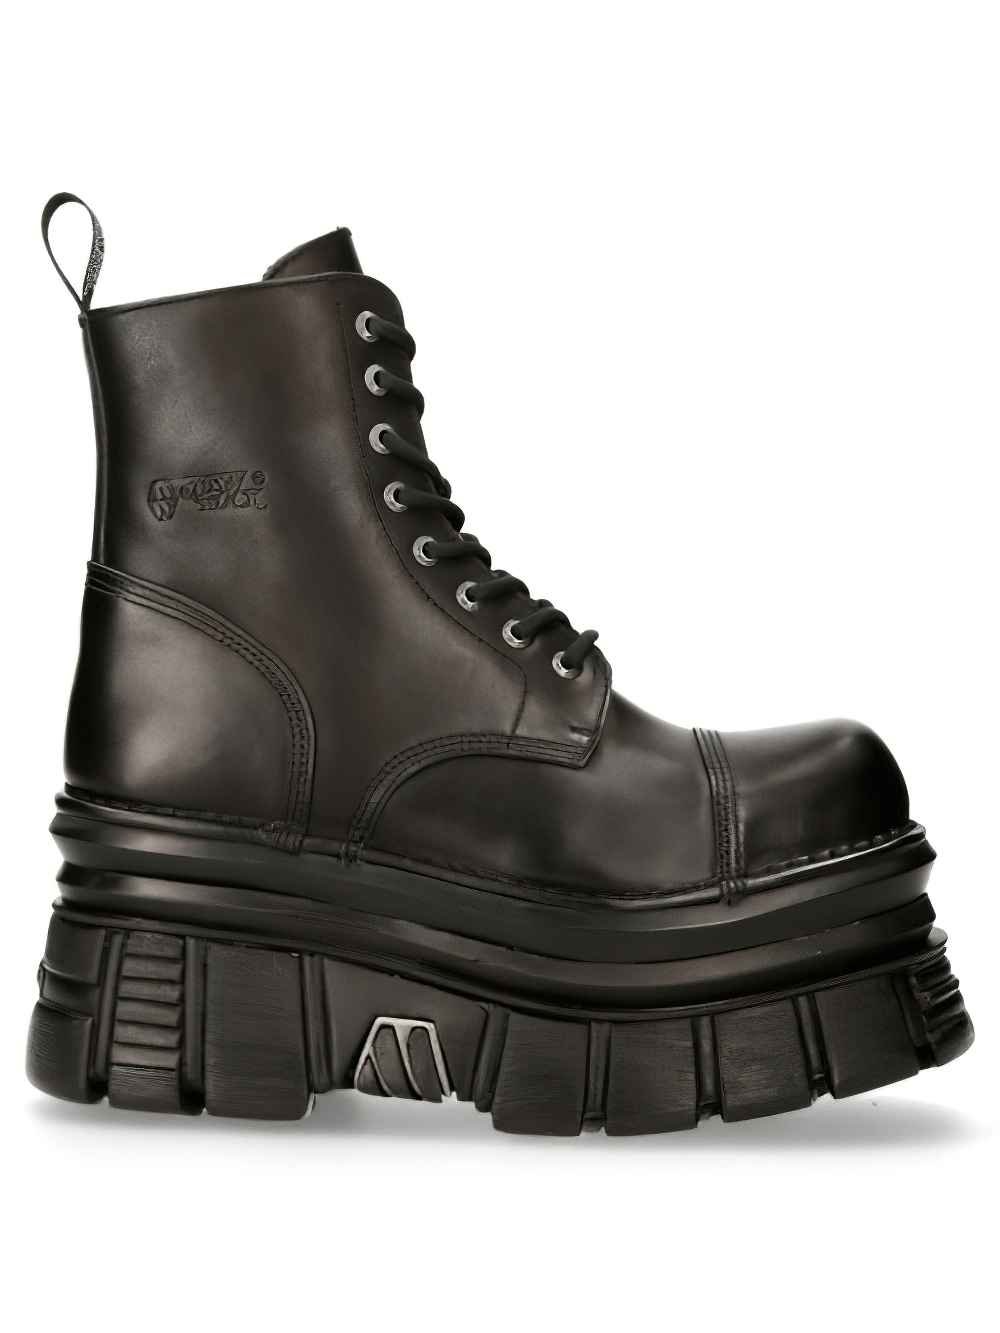 NEW ROCK Black Gothic Military Leather Ankle Boots